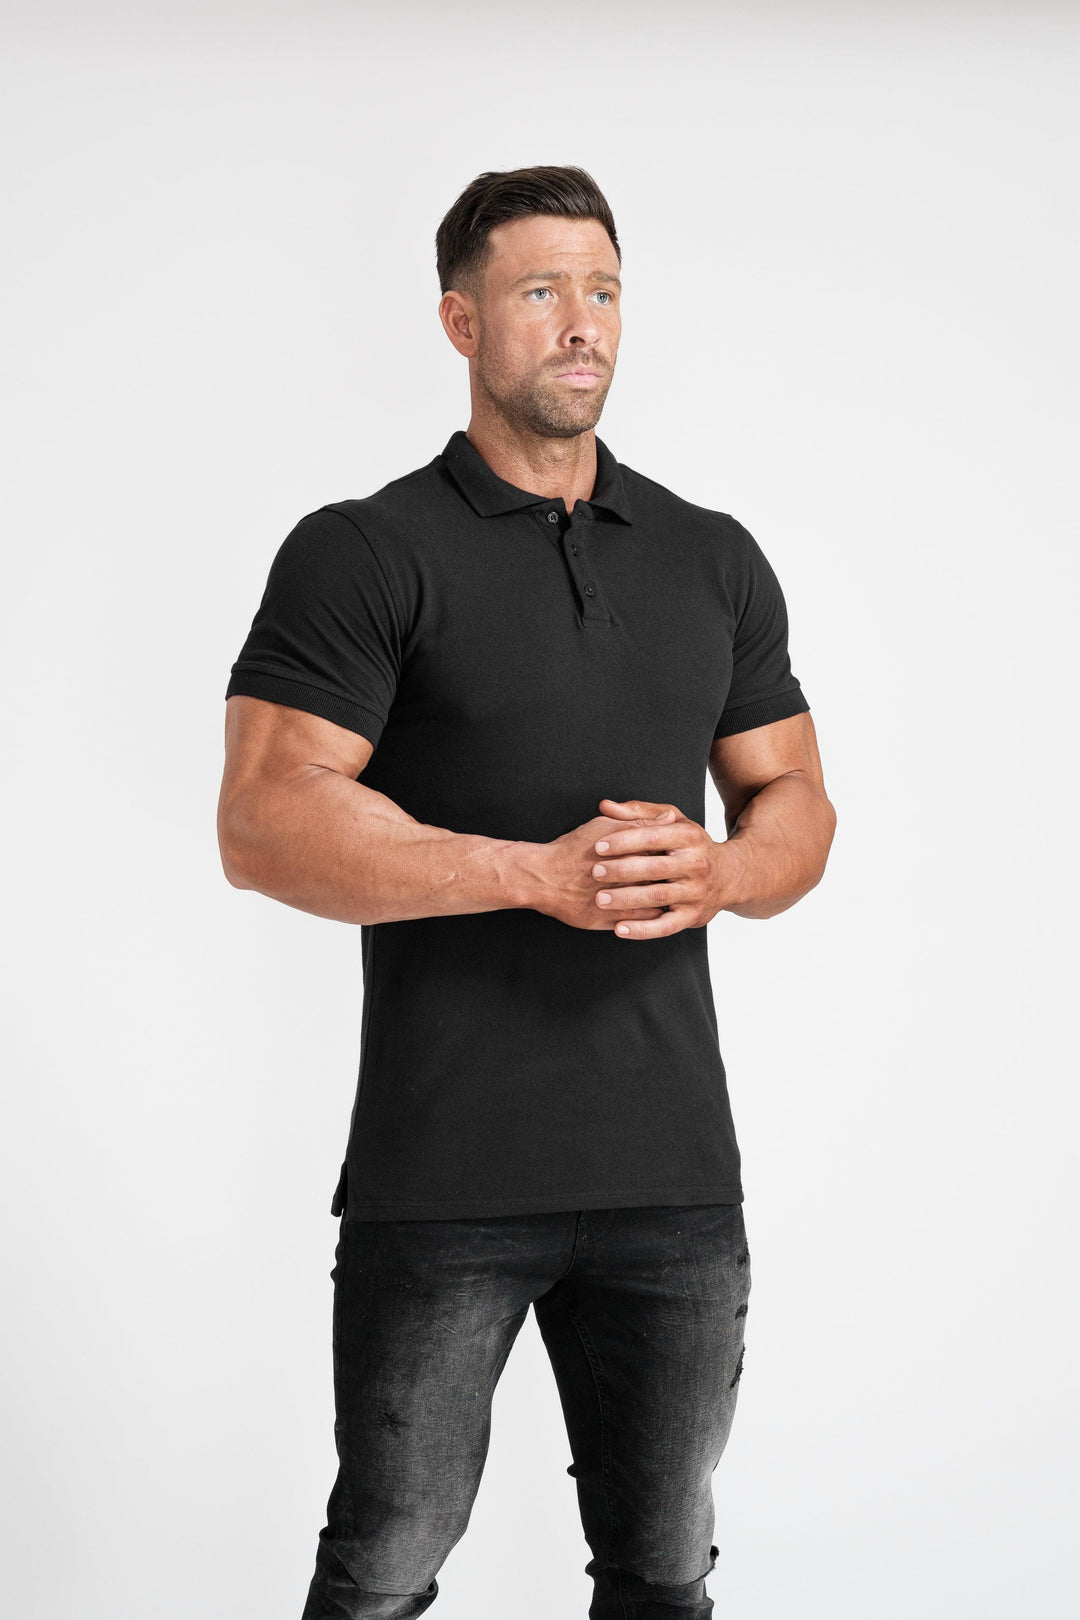 Muscle Fit Polo Short sleeve in black. A Proportionally Fitted and Tight Polo Shirt in Black. Ideal for bodybuilders.